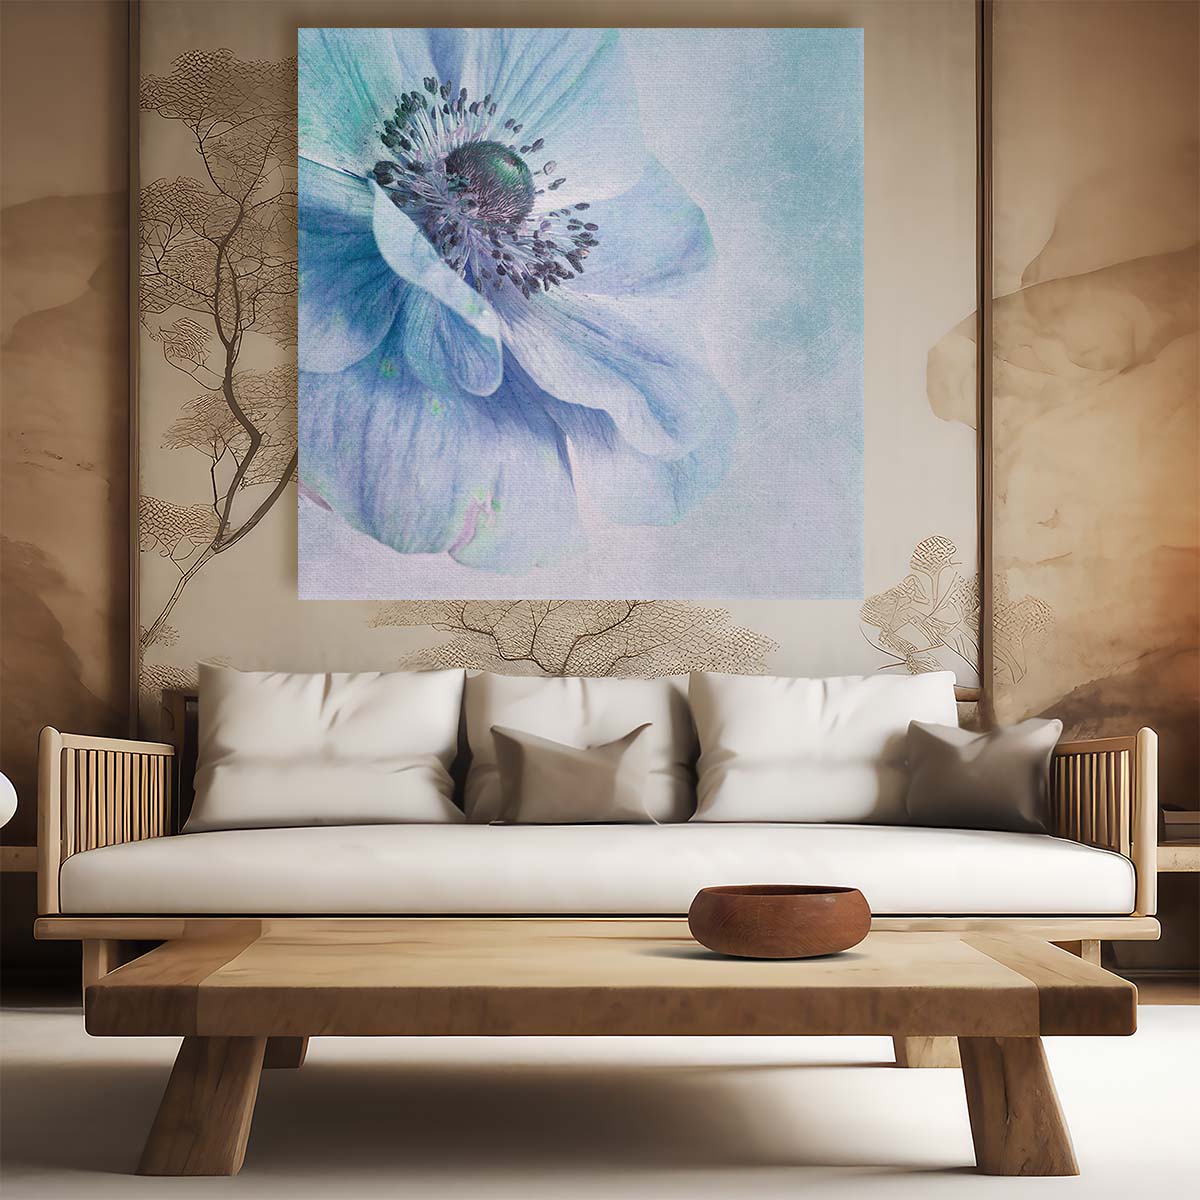 Delicate Turquoise Floral Macro Photography Botanical Square Wall Art by Luxuriance Designs. Made in USA.